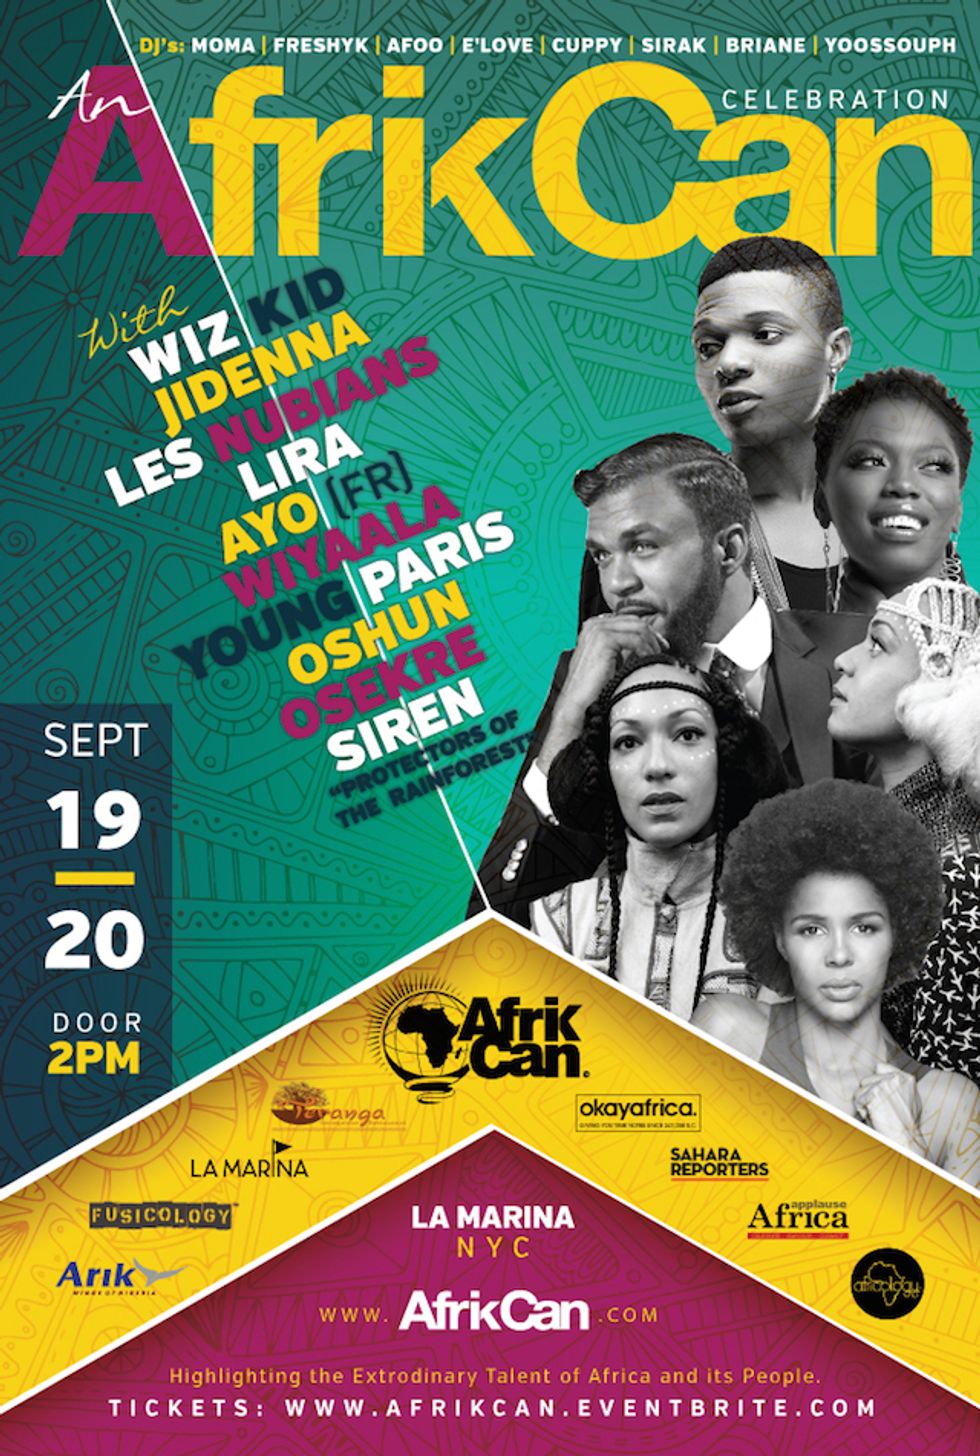 AfrikCan Festival: Jidenna, Les Nubians & More In NYC [9/19 - 9/20]